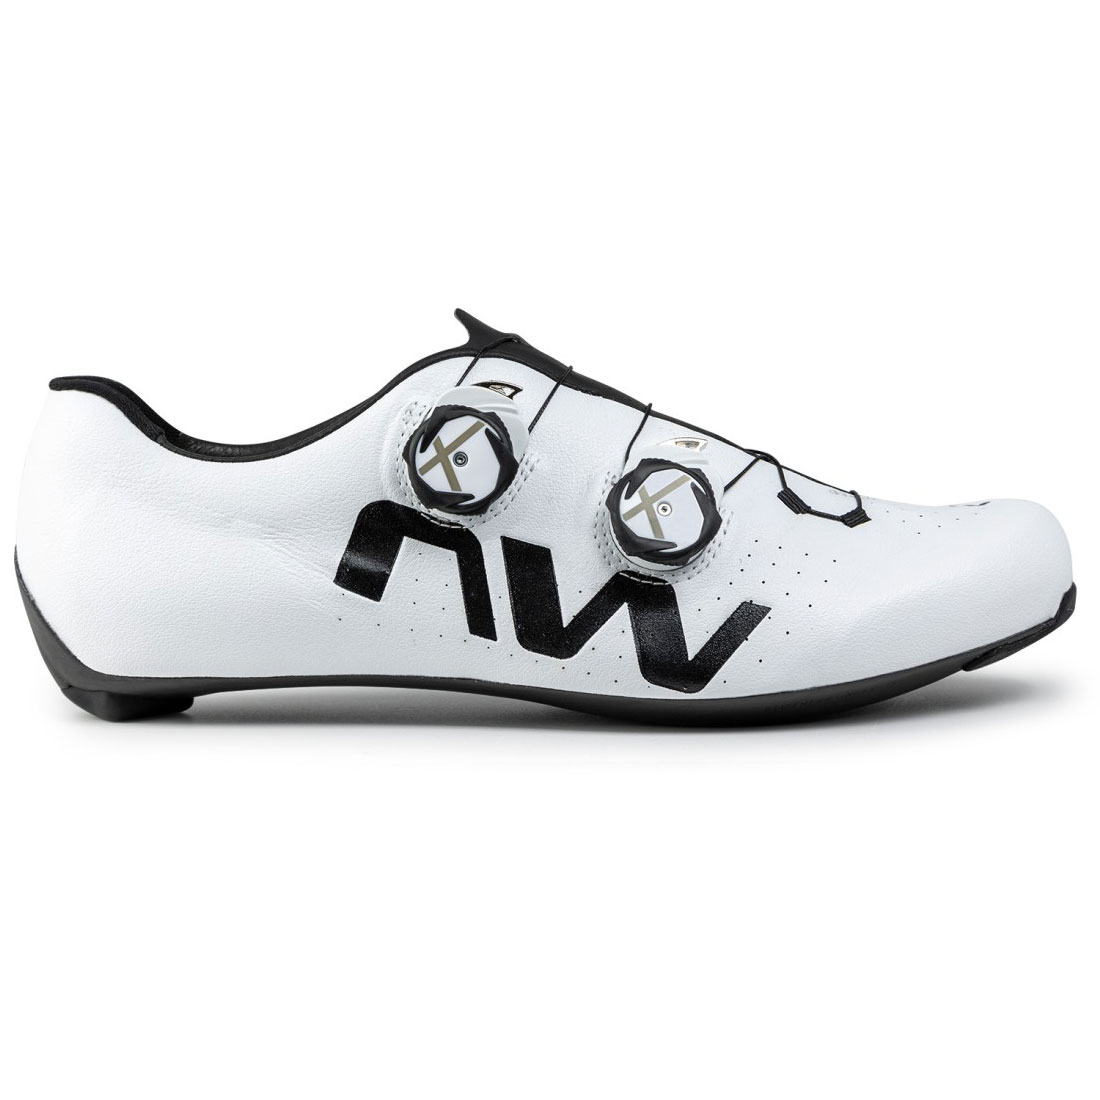 Picture of Northwave Veloce Extreme Road Shoes - white/black 51